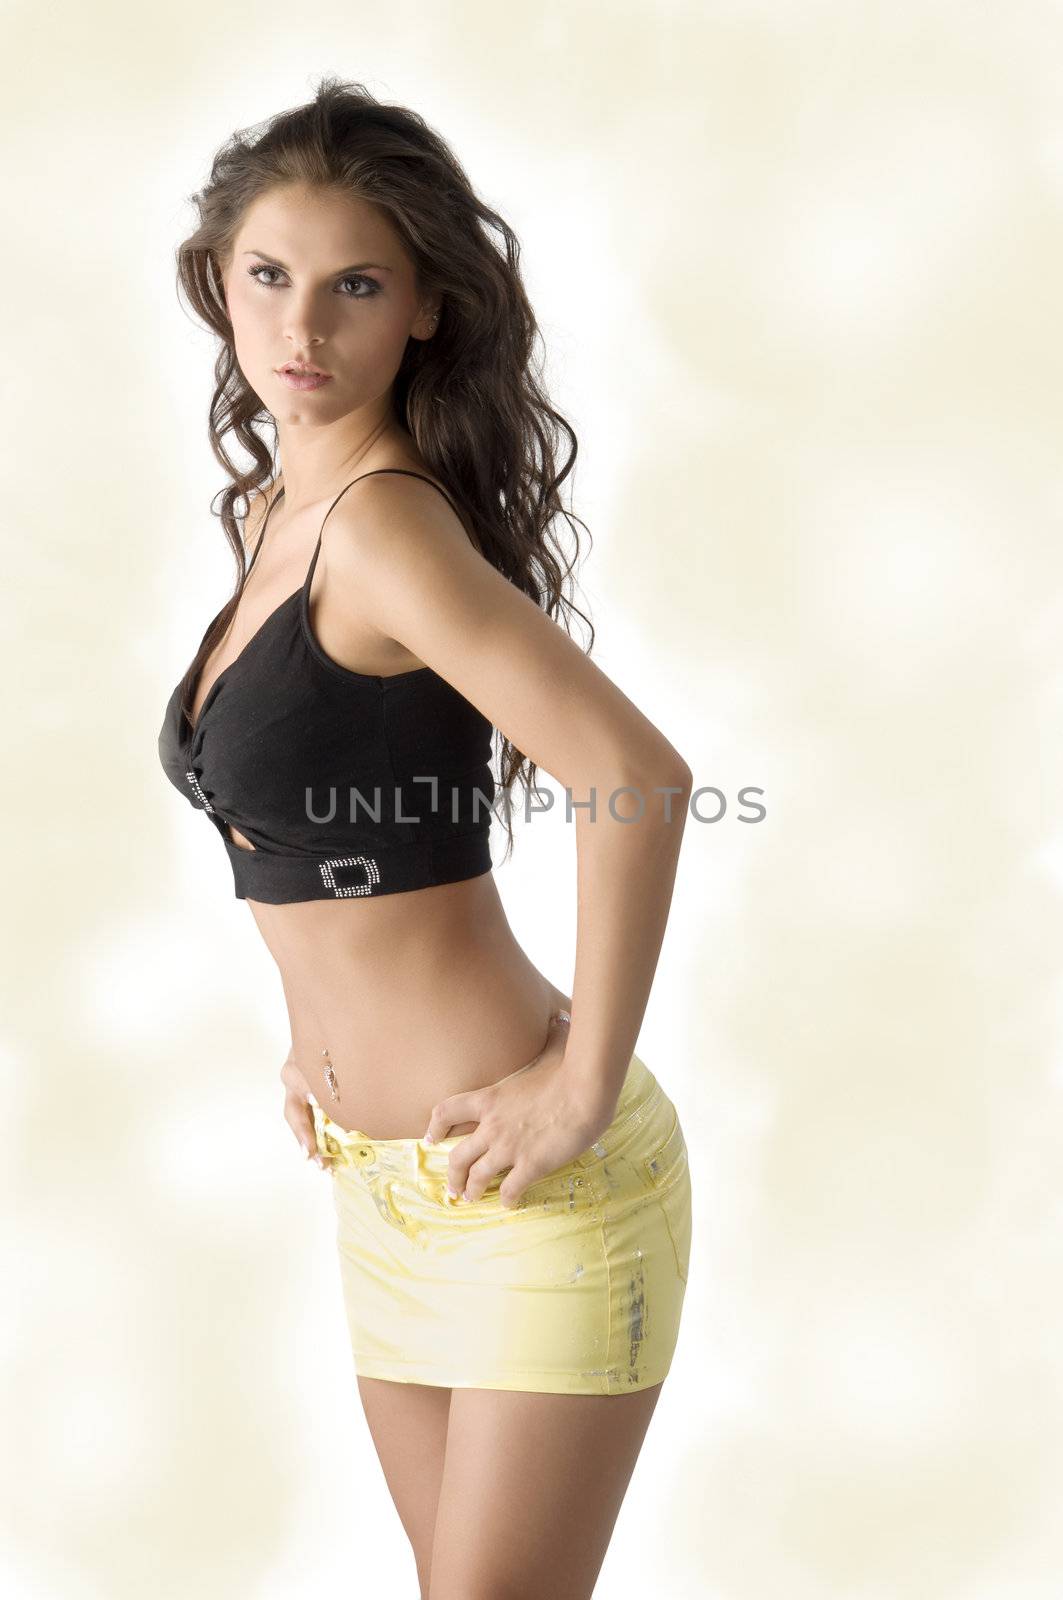 sensual brunette with short yellow skirt and a black top in model pose